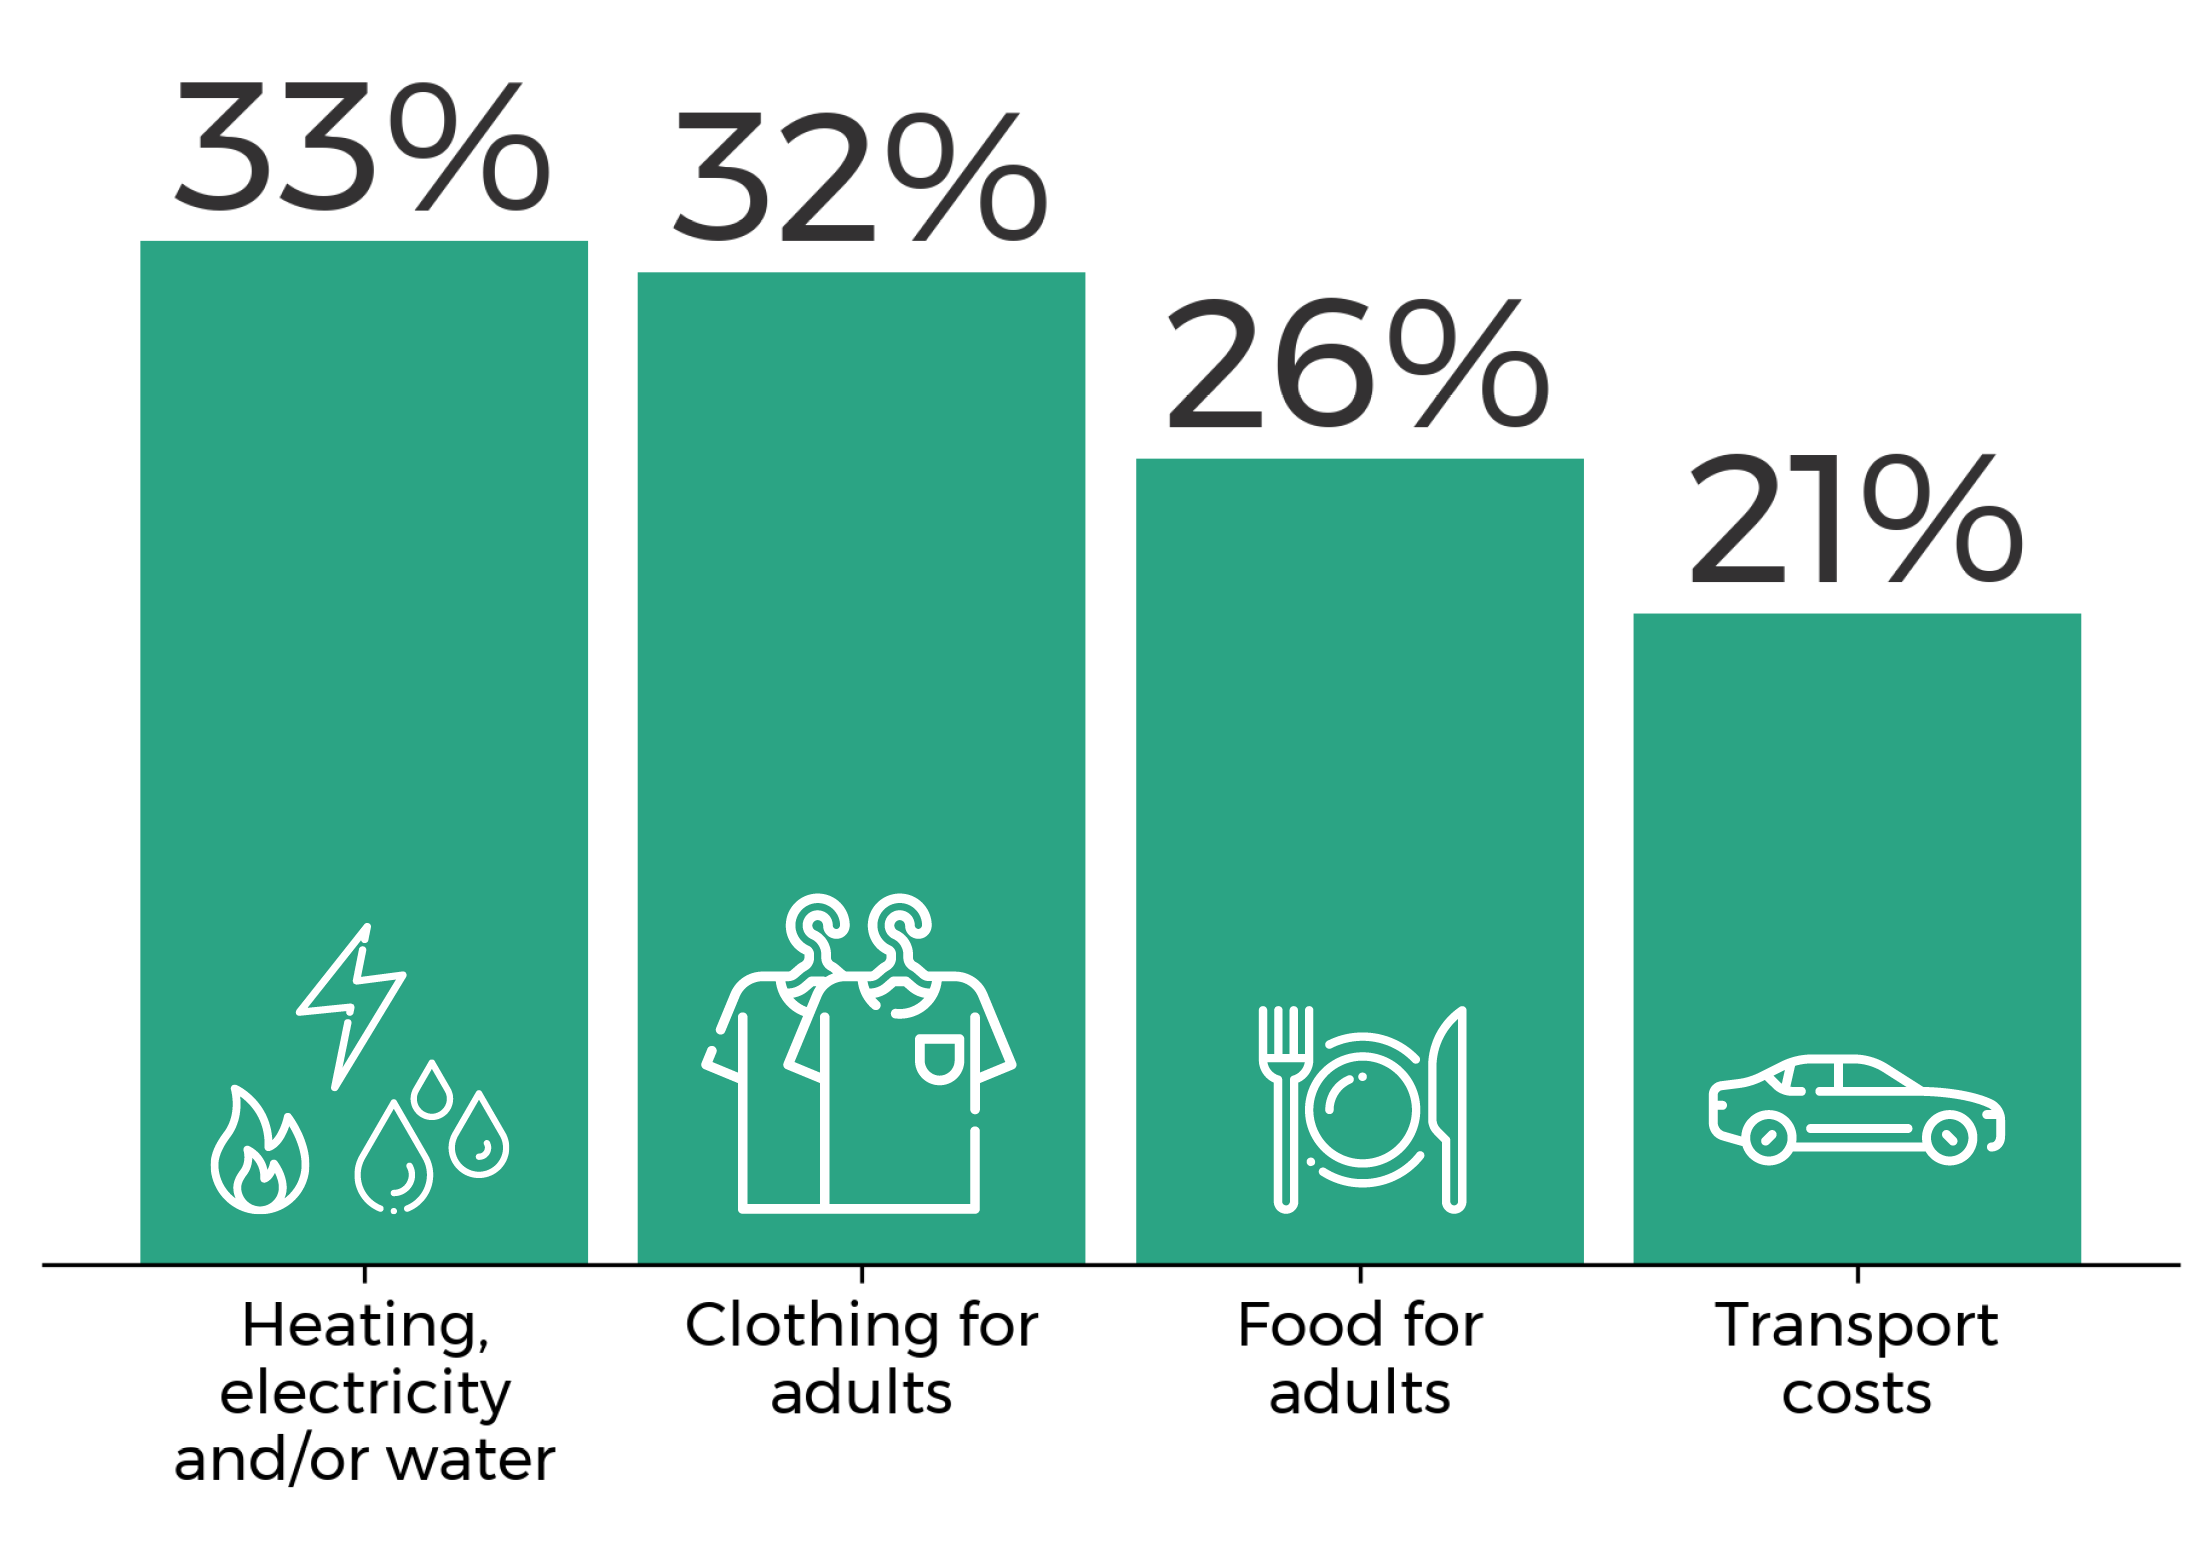 Heating, electricity and/or water 33%; Clothing for adults 32%; Food for adults 26%; Transport costs 21%.